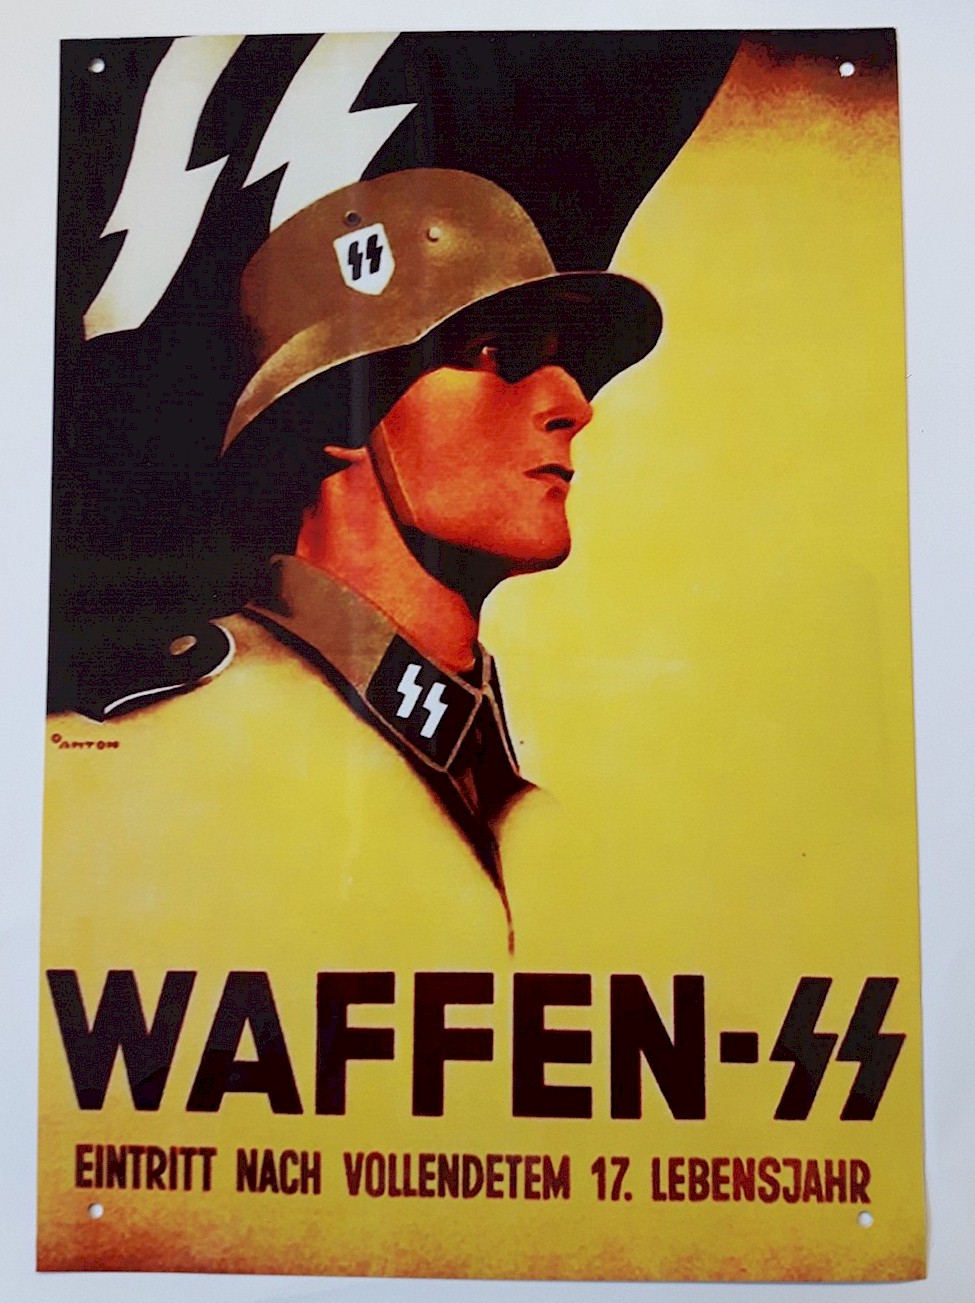 GERMAN WAFFEN-SS ADMISSION AFTER THE FOLLOWING 17. LIFE YEAR